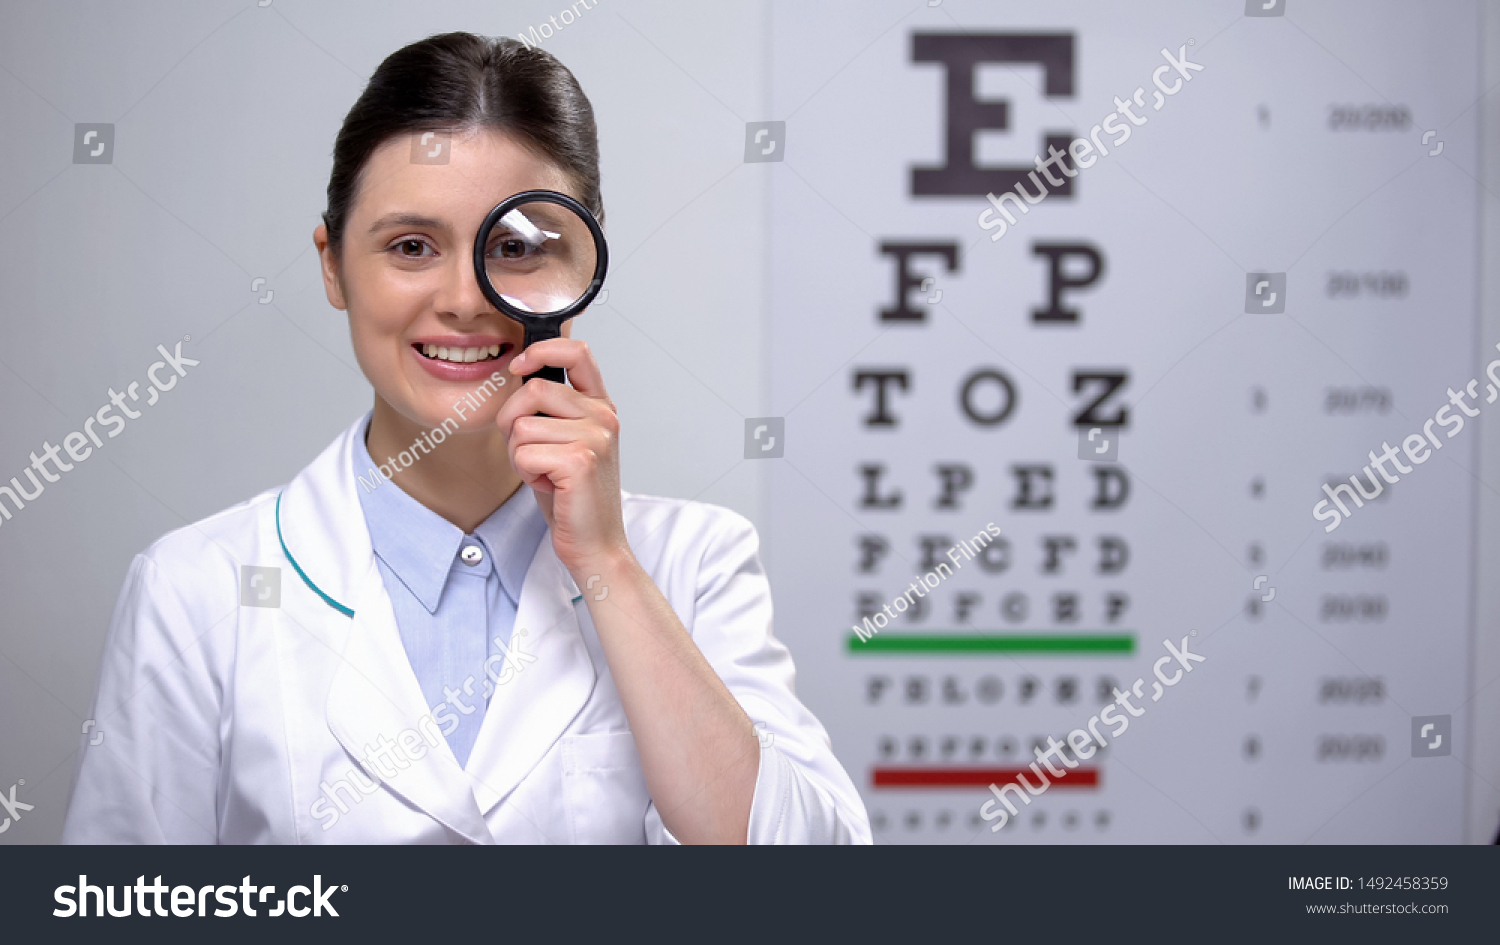 Smiling optometrist looking through magnifying glass and smiling, sight test #1492458359